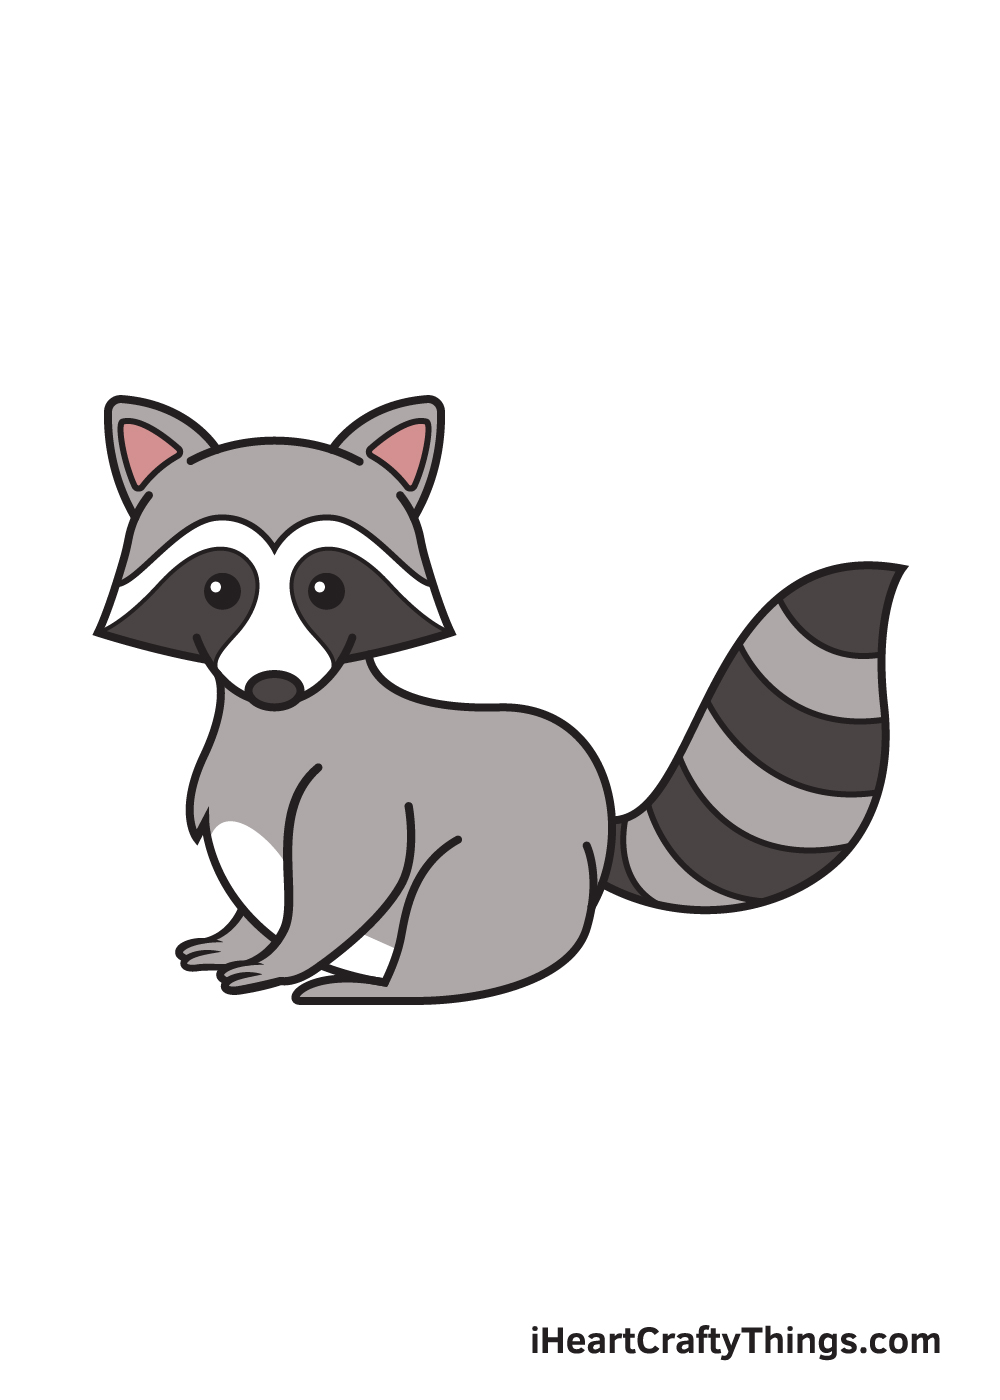 Inspiration From Nature For Raccoon Drawings